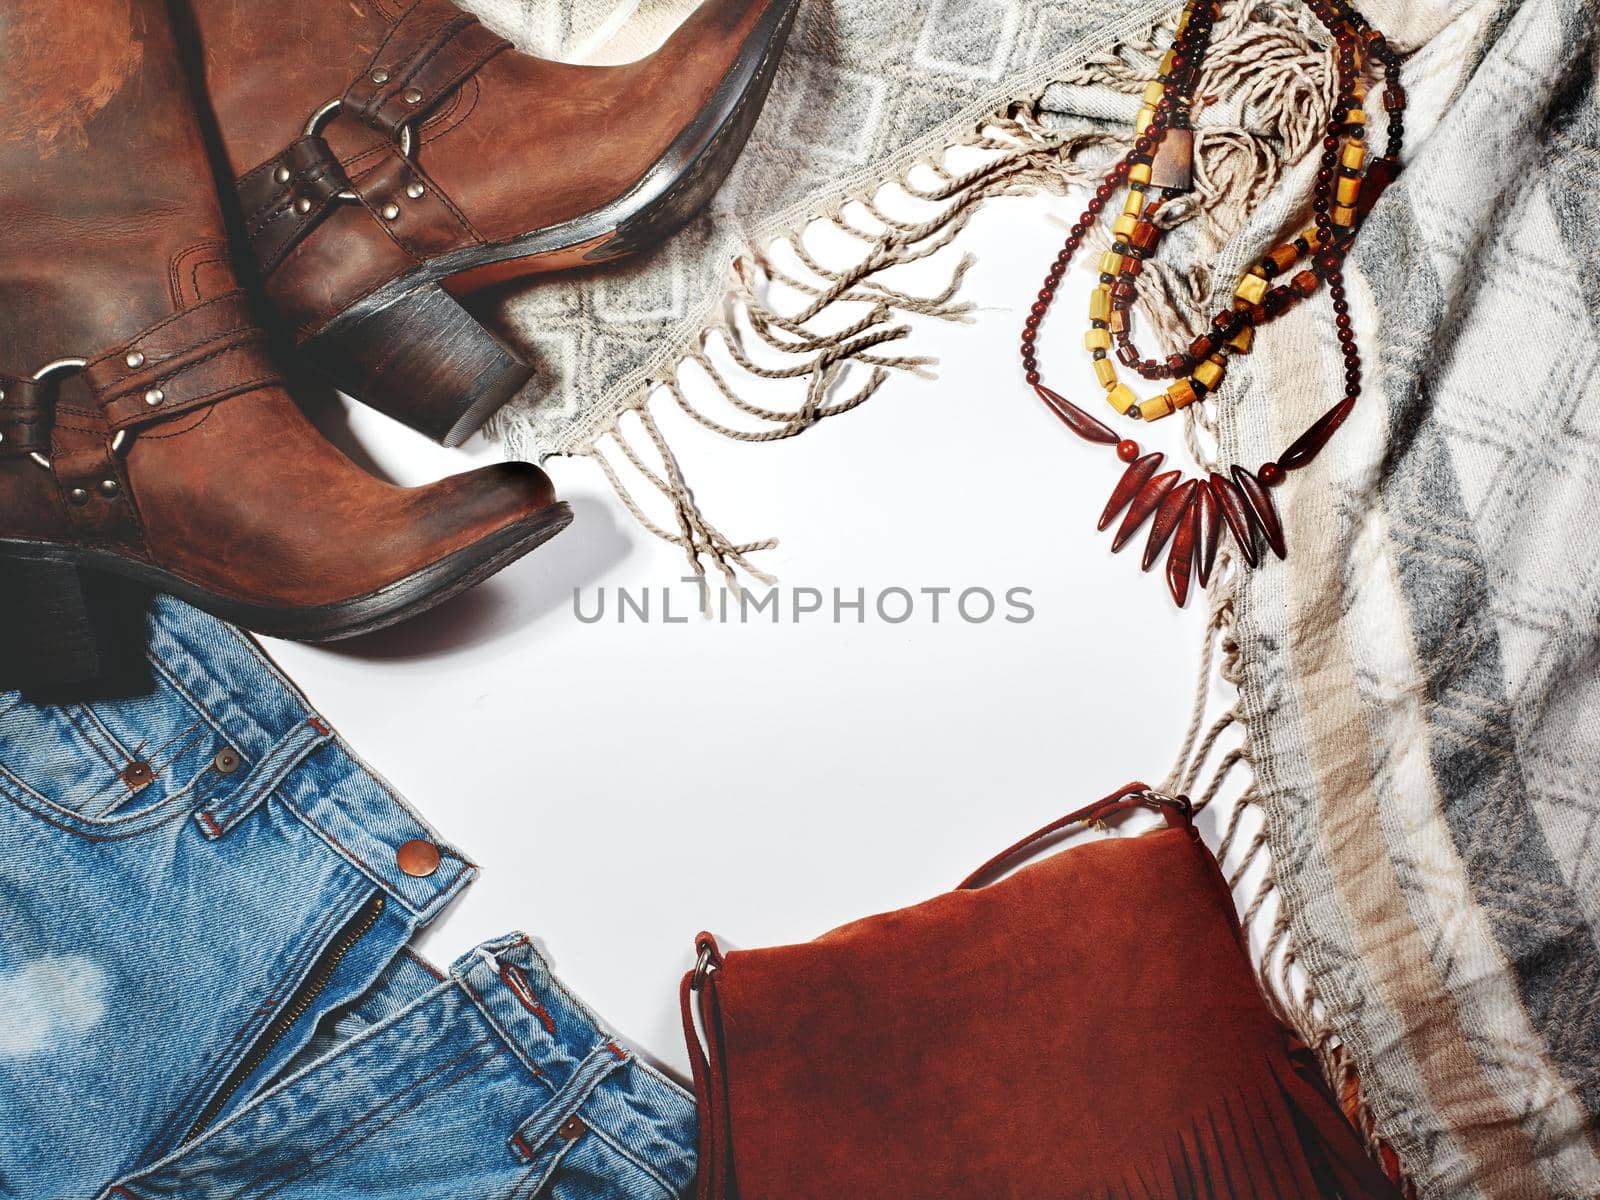 Boho Style. Leather Boots, Wooden Necklace, Denim Shorts and Hippie Bag with Fringe on White Background. Overhead View of Woman's Casual Day Outfits. Trendy Hipster Look.